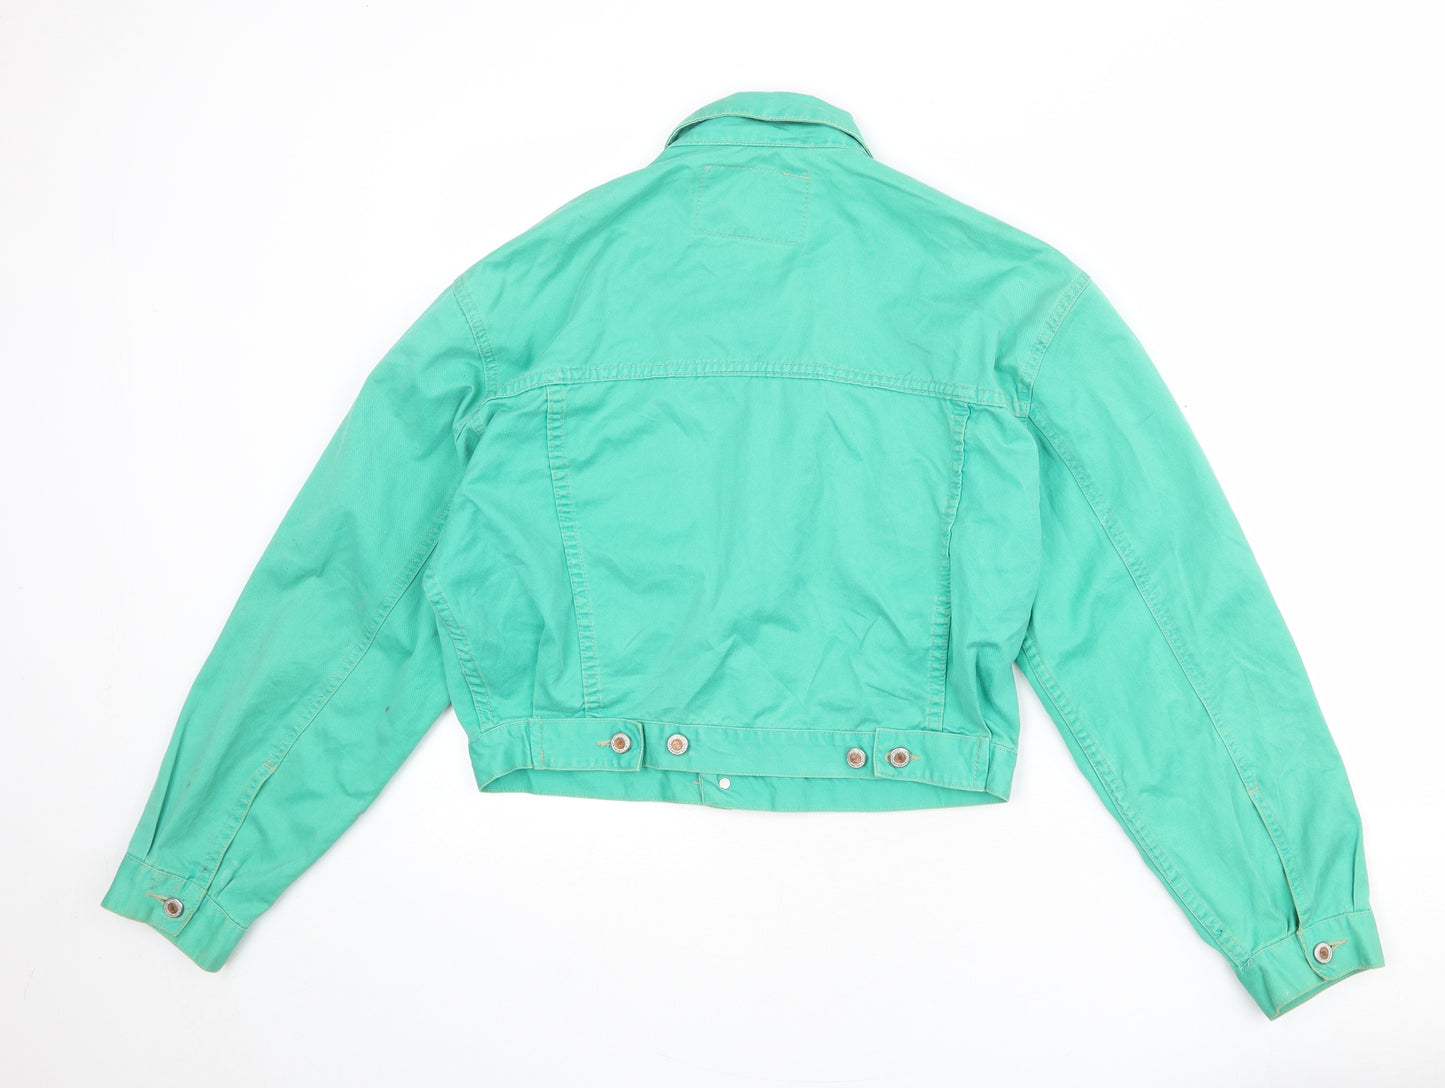 Check Up Womens Green Jacket Size L Button